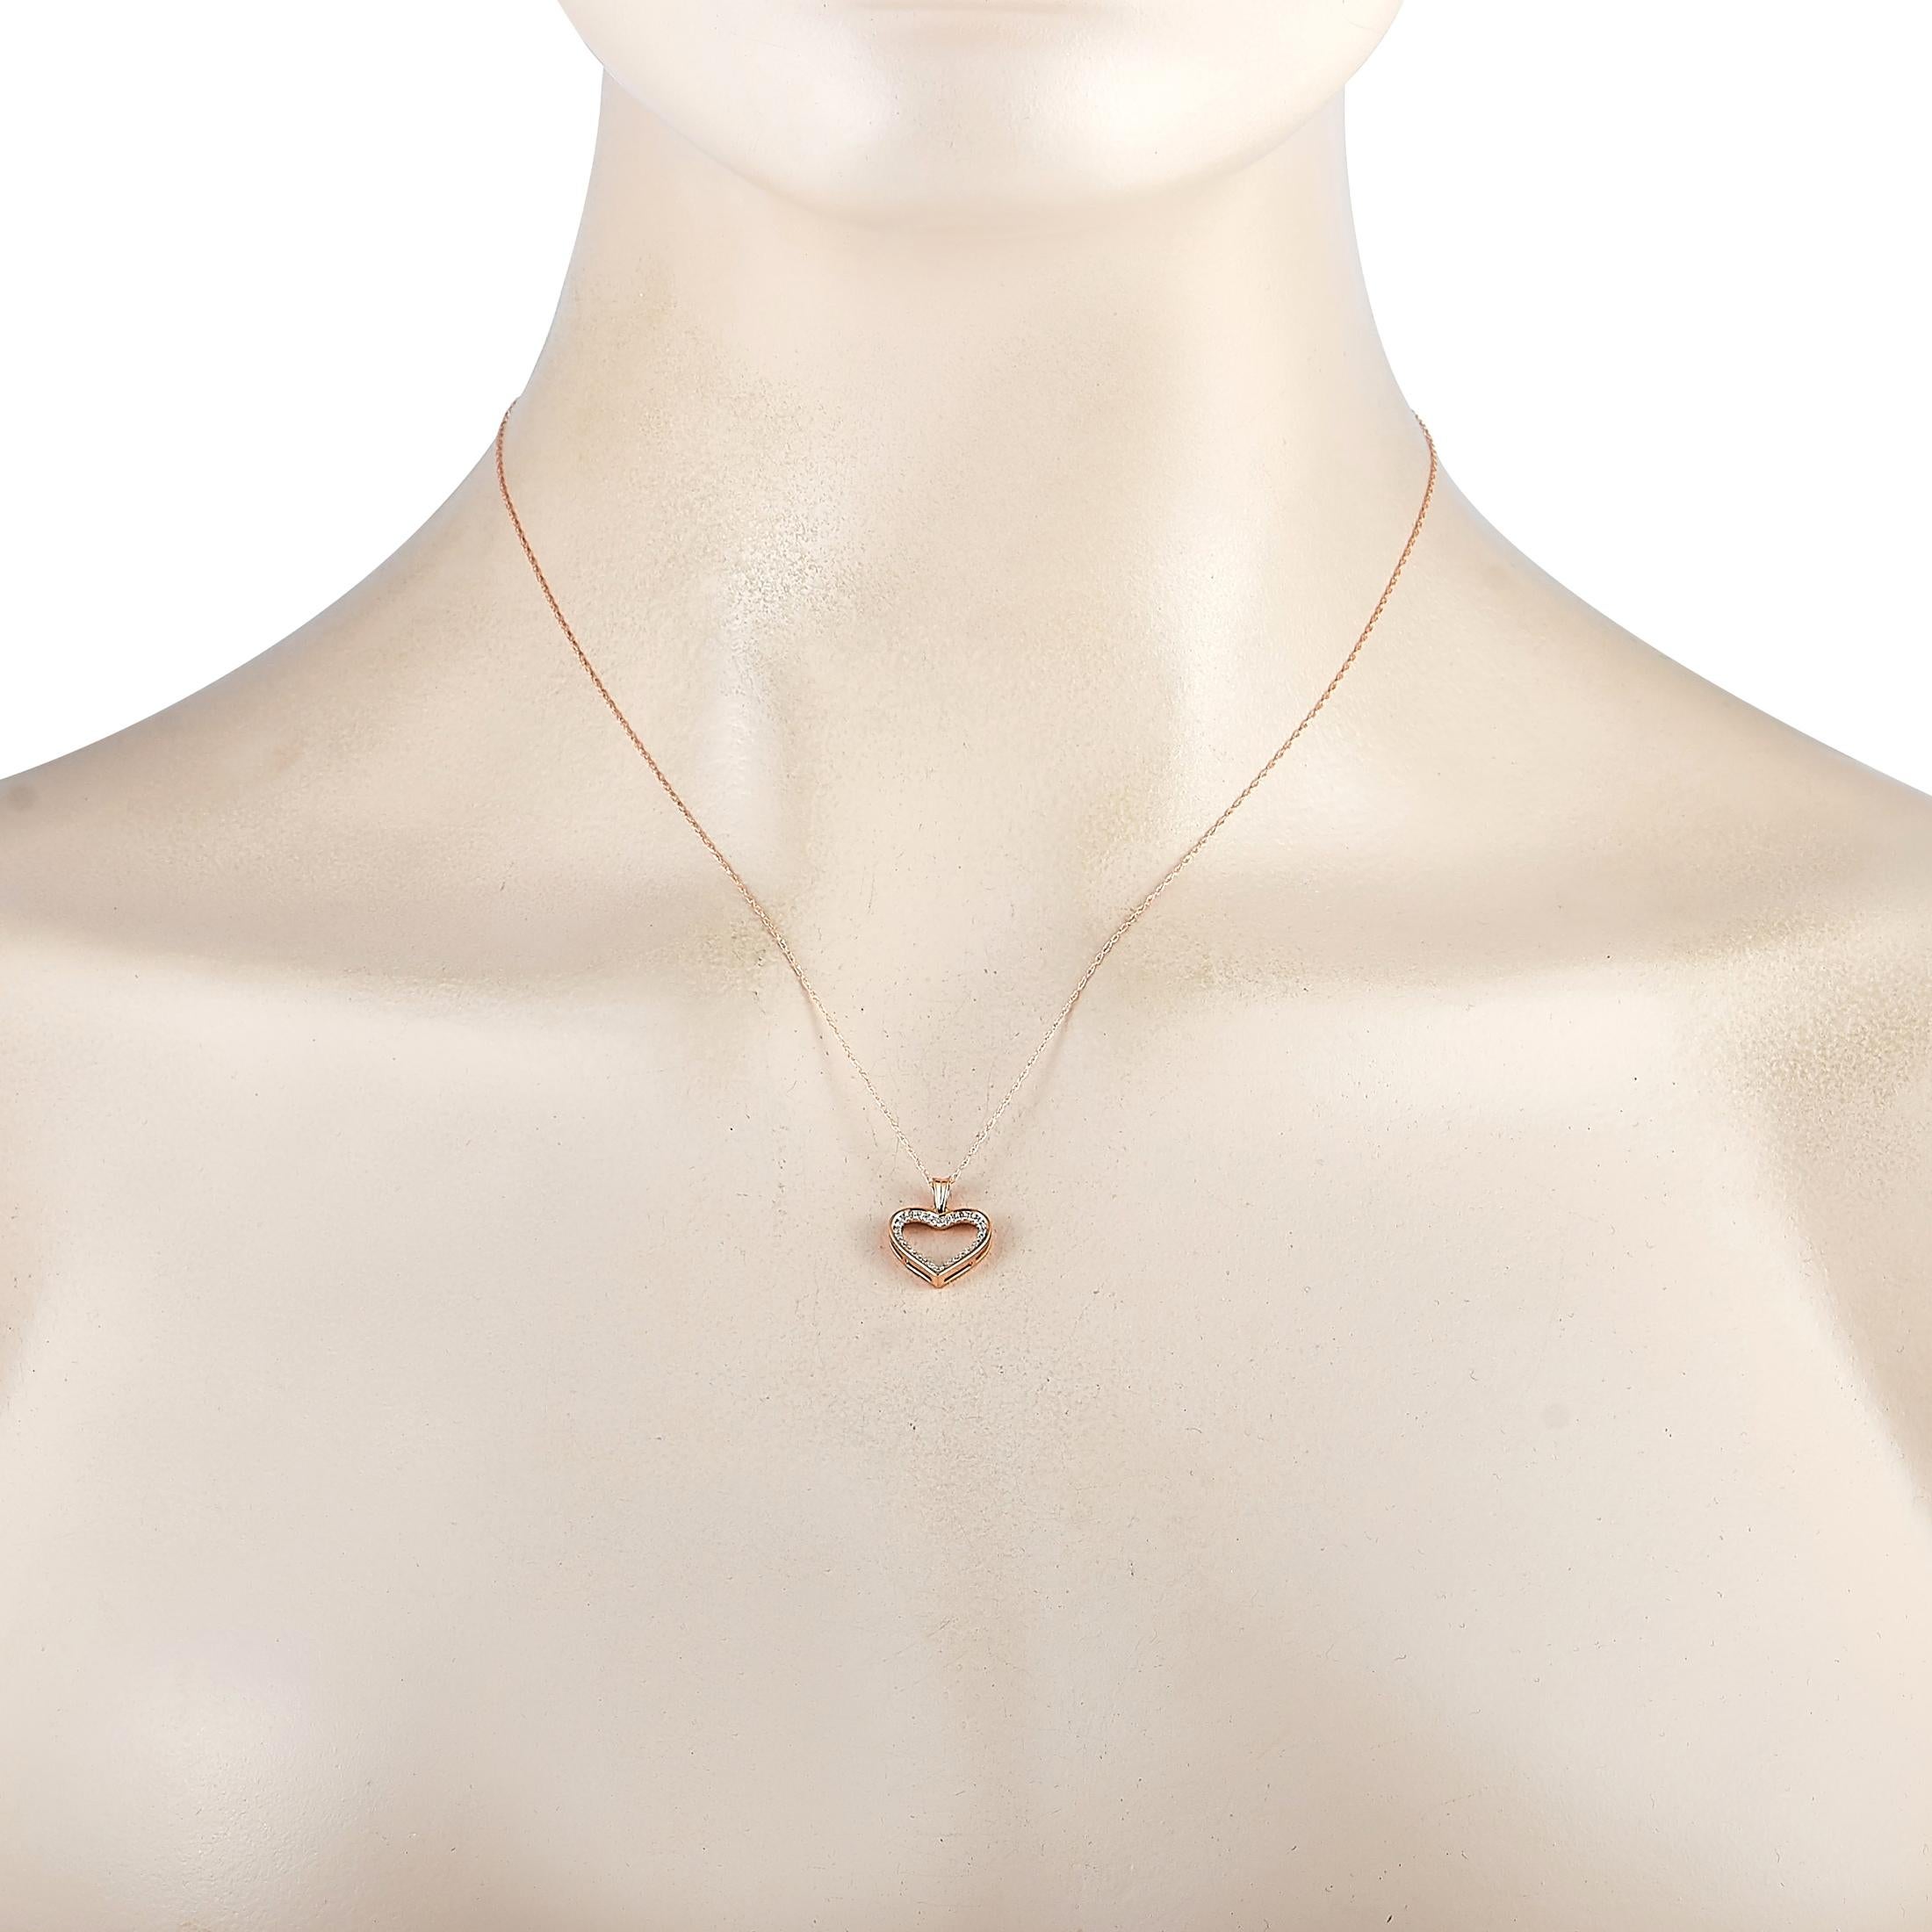 This LB Exclusive necklace is crafted from 14K rose gold and weighs 1.2 grams. It is presented with a 17” chain and a heart pendant that measures 0.62” in length and 0.50” in width. The necklace is embellished with diamonds that total 0.10 carats.
